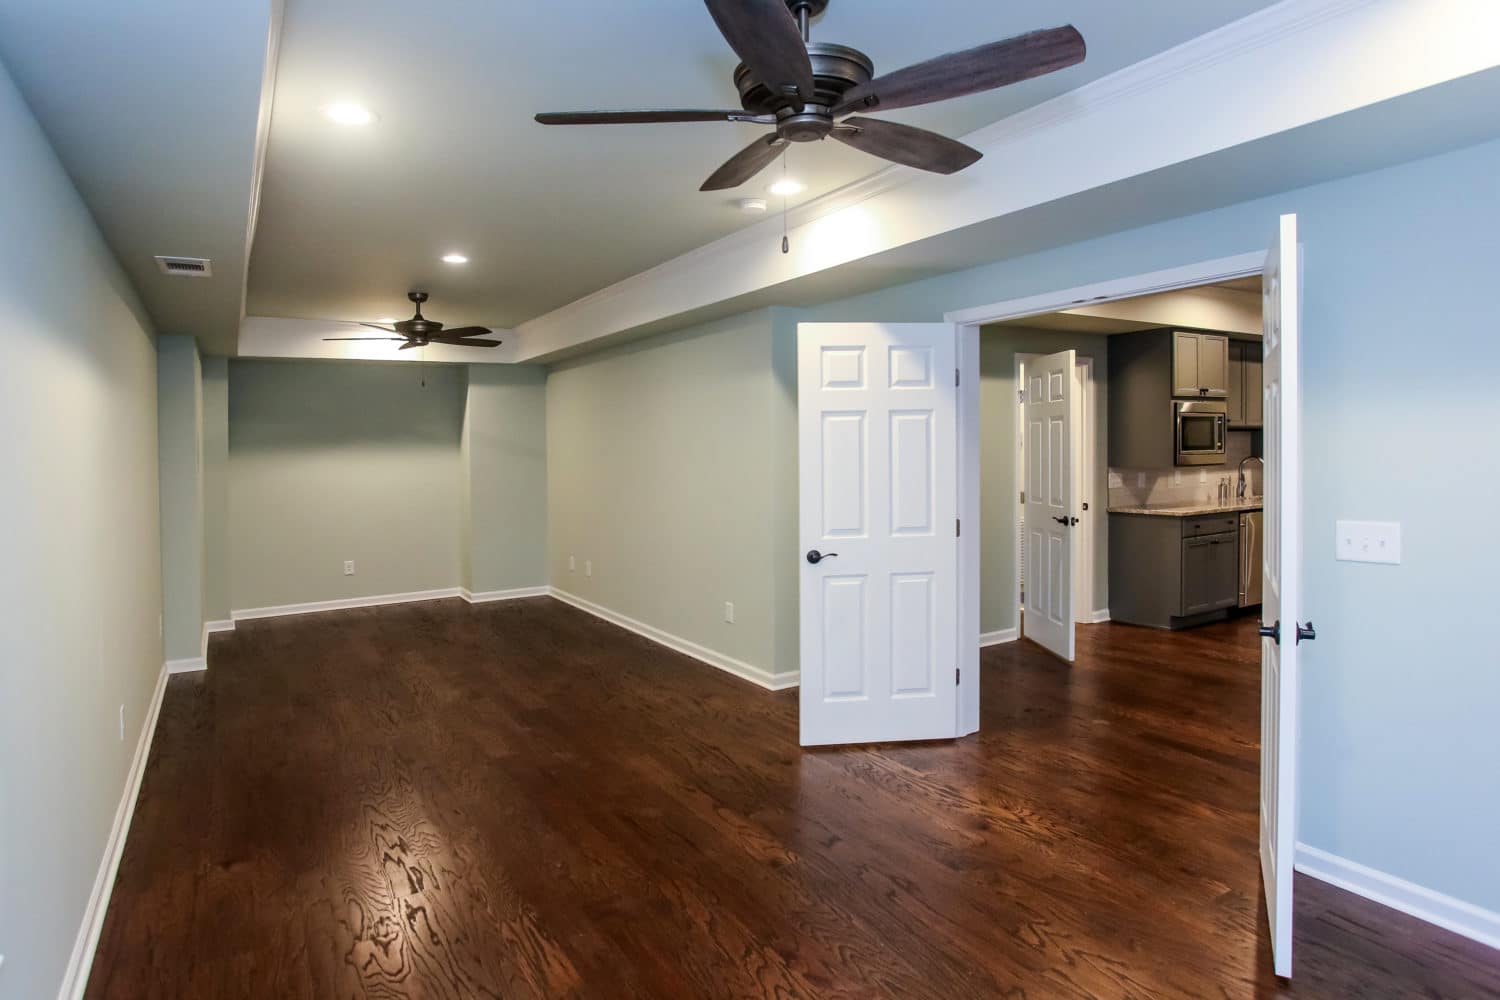 The Pros Vs Cons Of Wood Floors, Prefinished Hardwood Flooring Pros And Cons